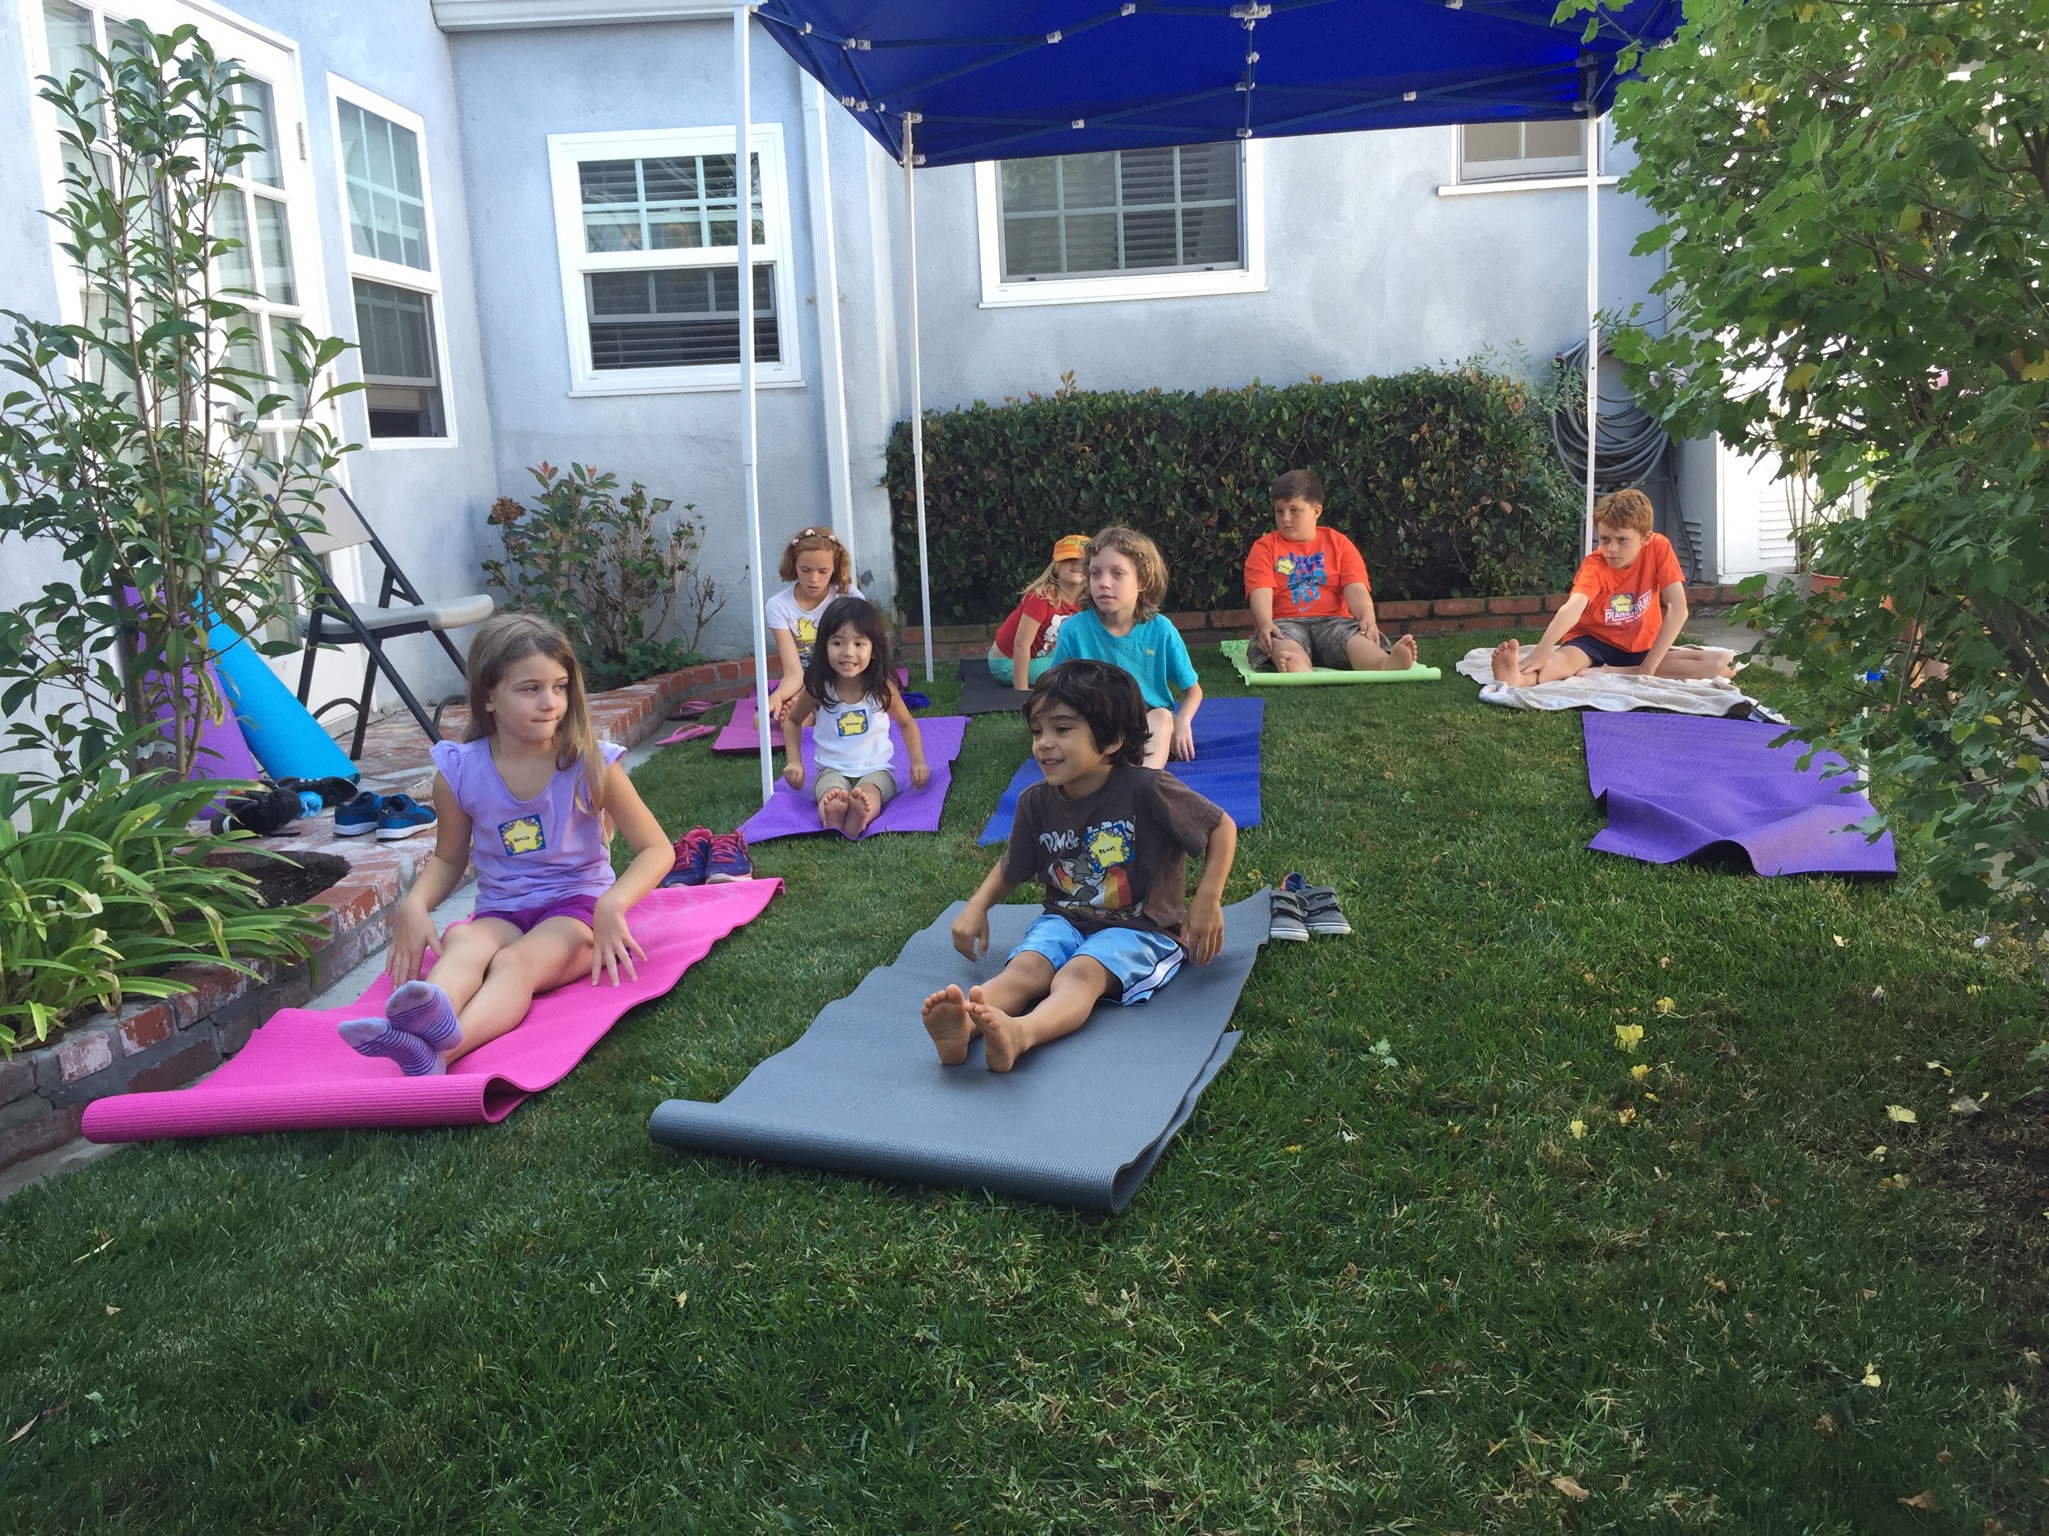 Kids having fun learning yoga at the Pop Up - Iyashi Wellness Kids event in 2015